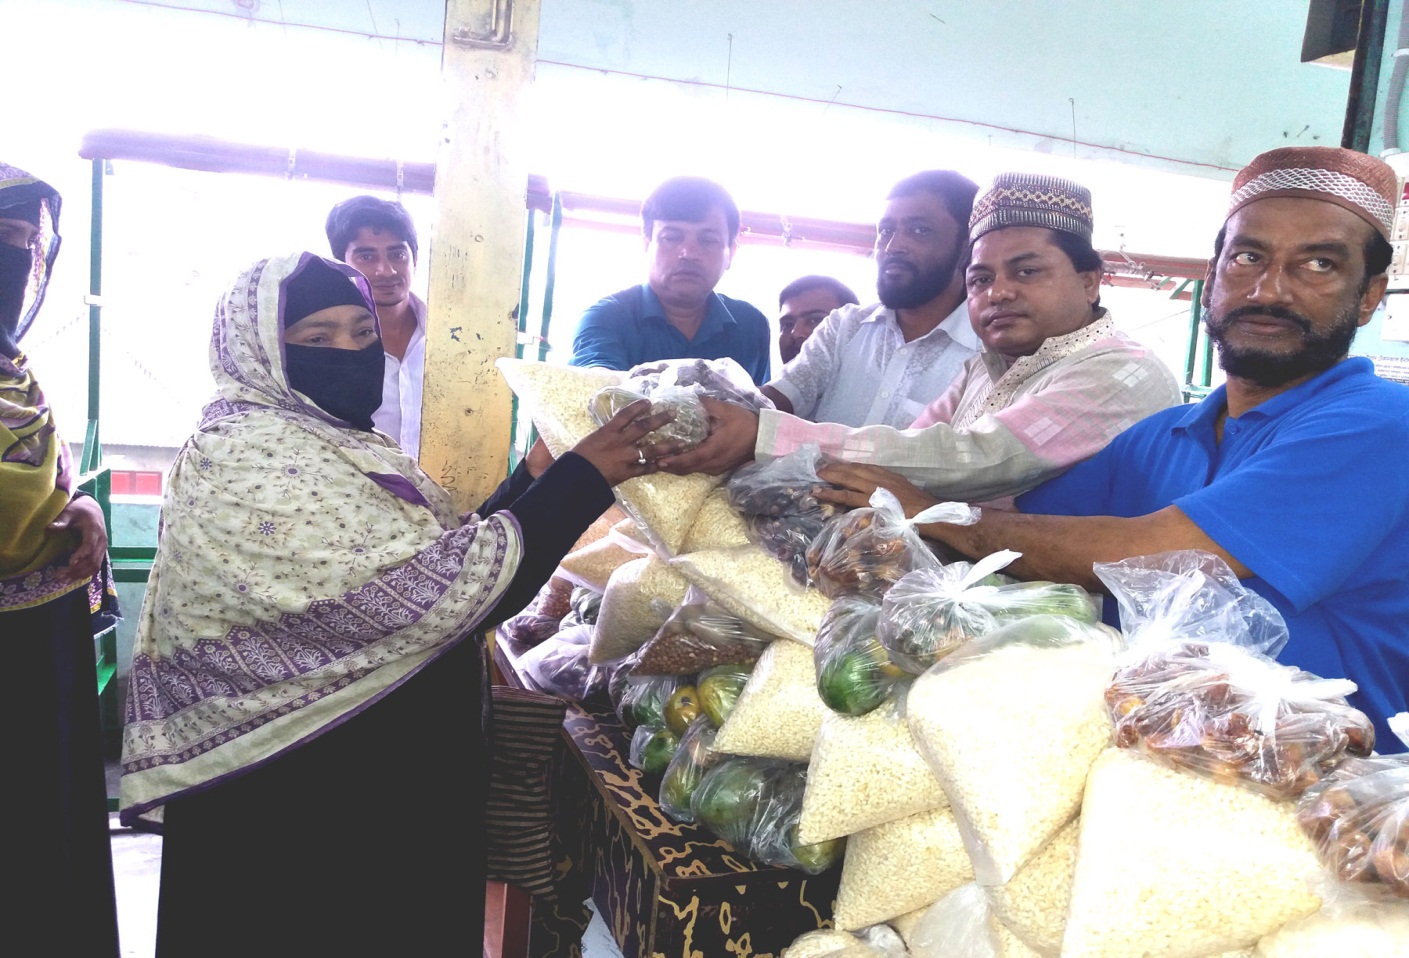 Chairman of Begumganj-Sonaimuri Education and Health Development Foundation Md. Gias Uddin Mithu is distributing Iftar items on the occasion of the holy month of Ramadan.